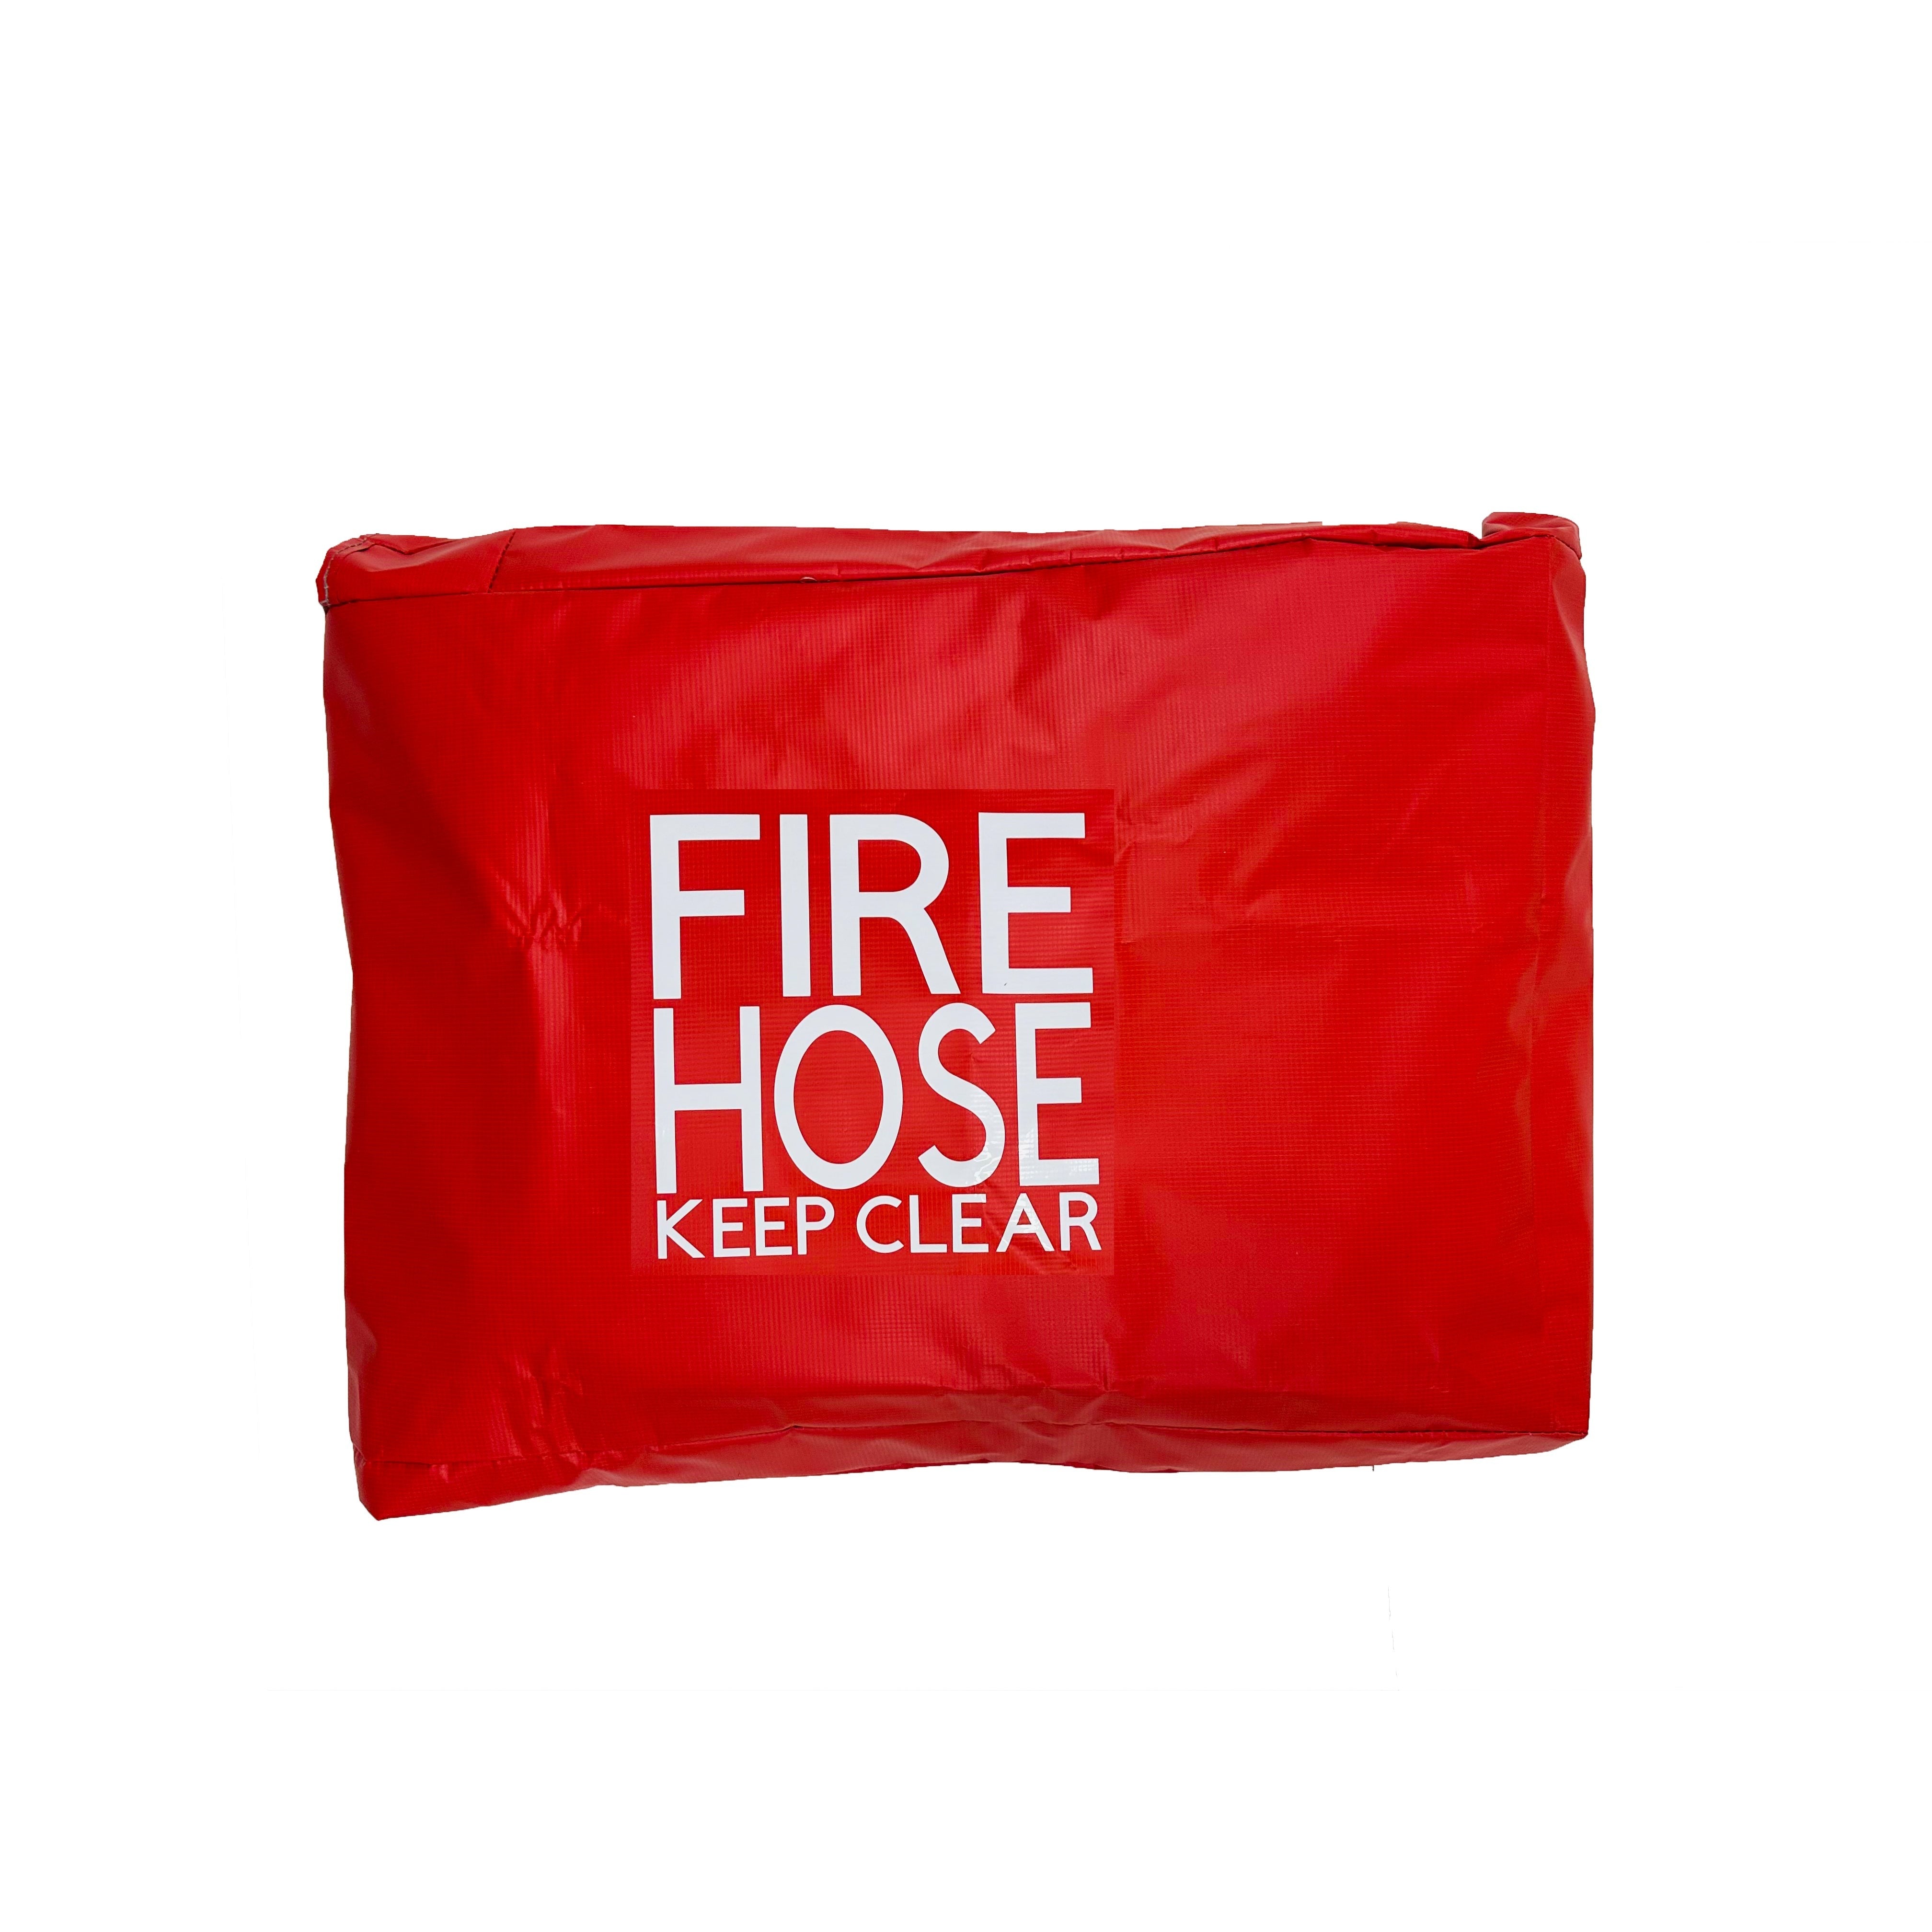 Fire Hose Hump Rack Cover - 29 in X 5 in X 20 - Red Vinyl